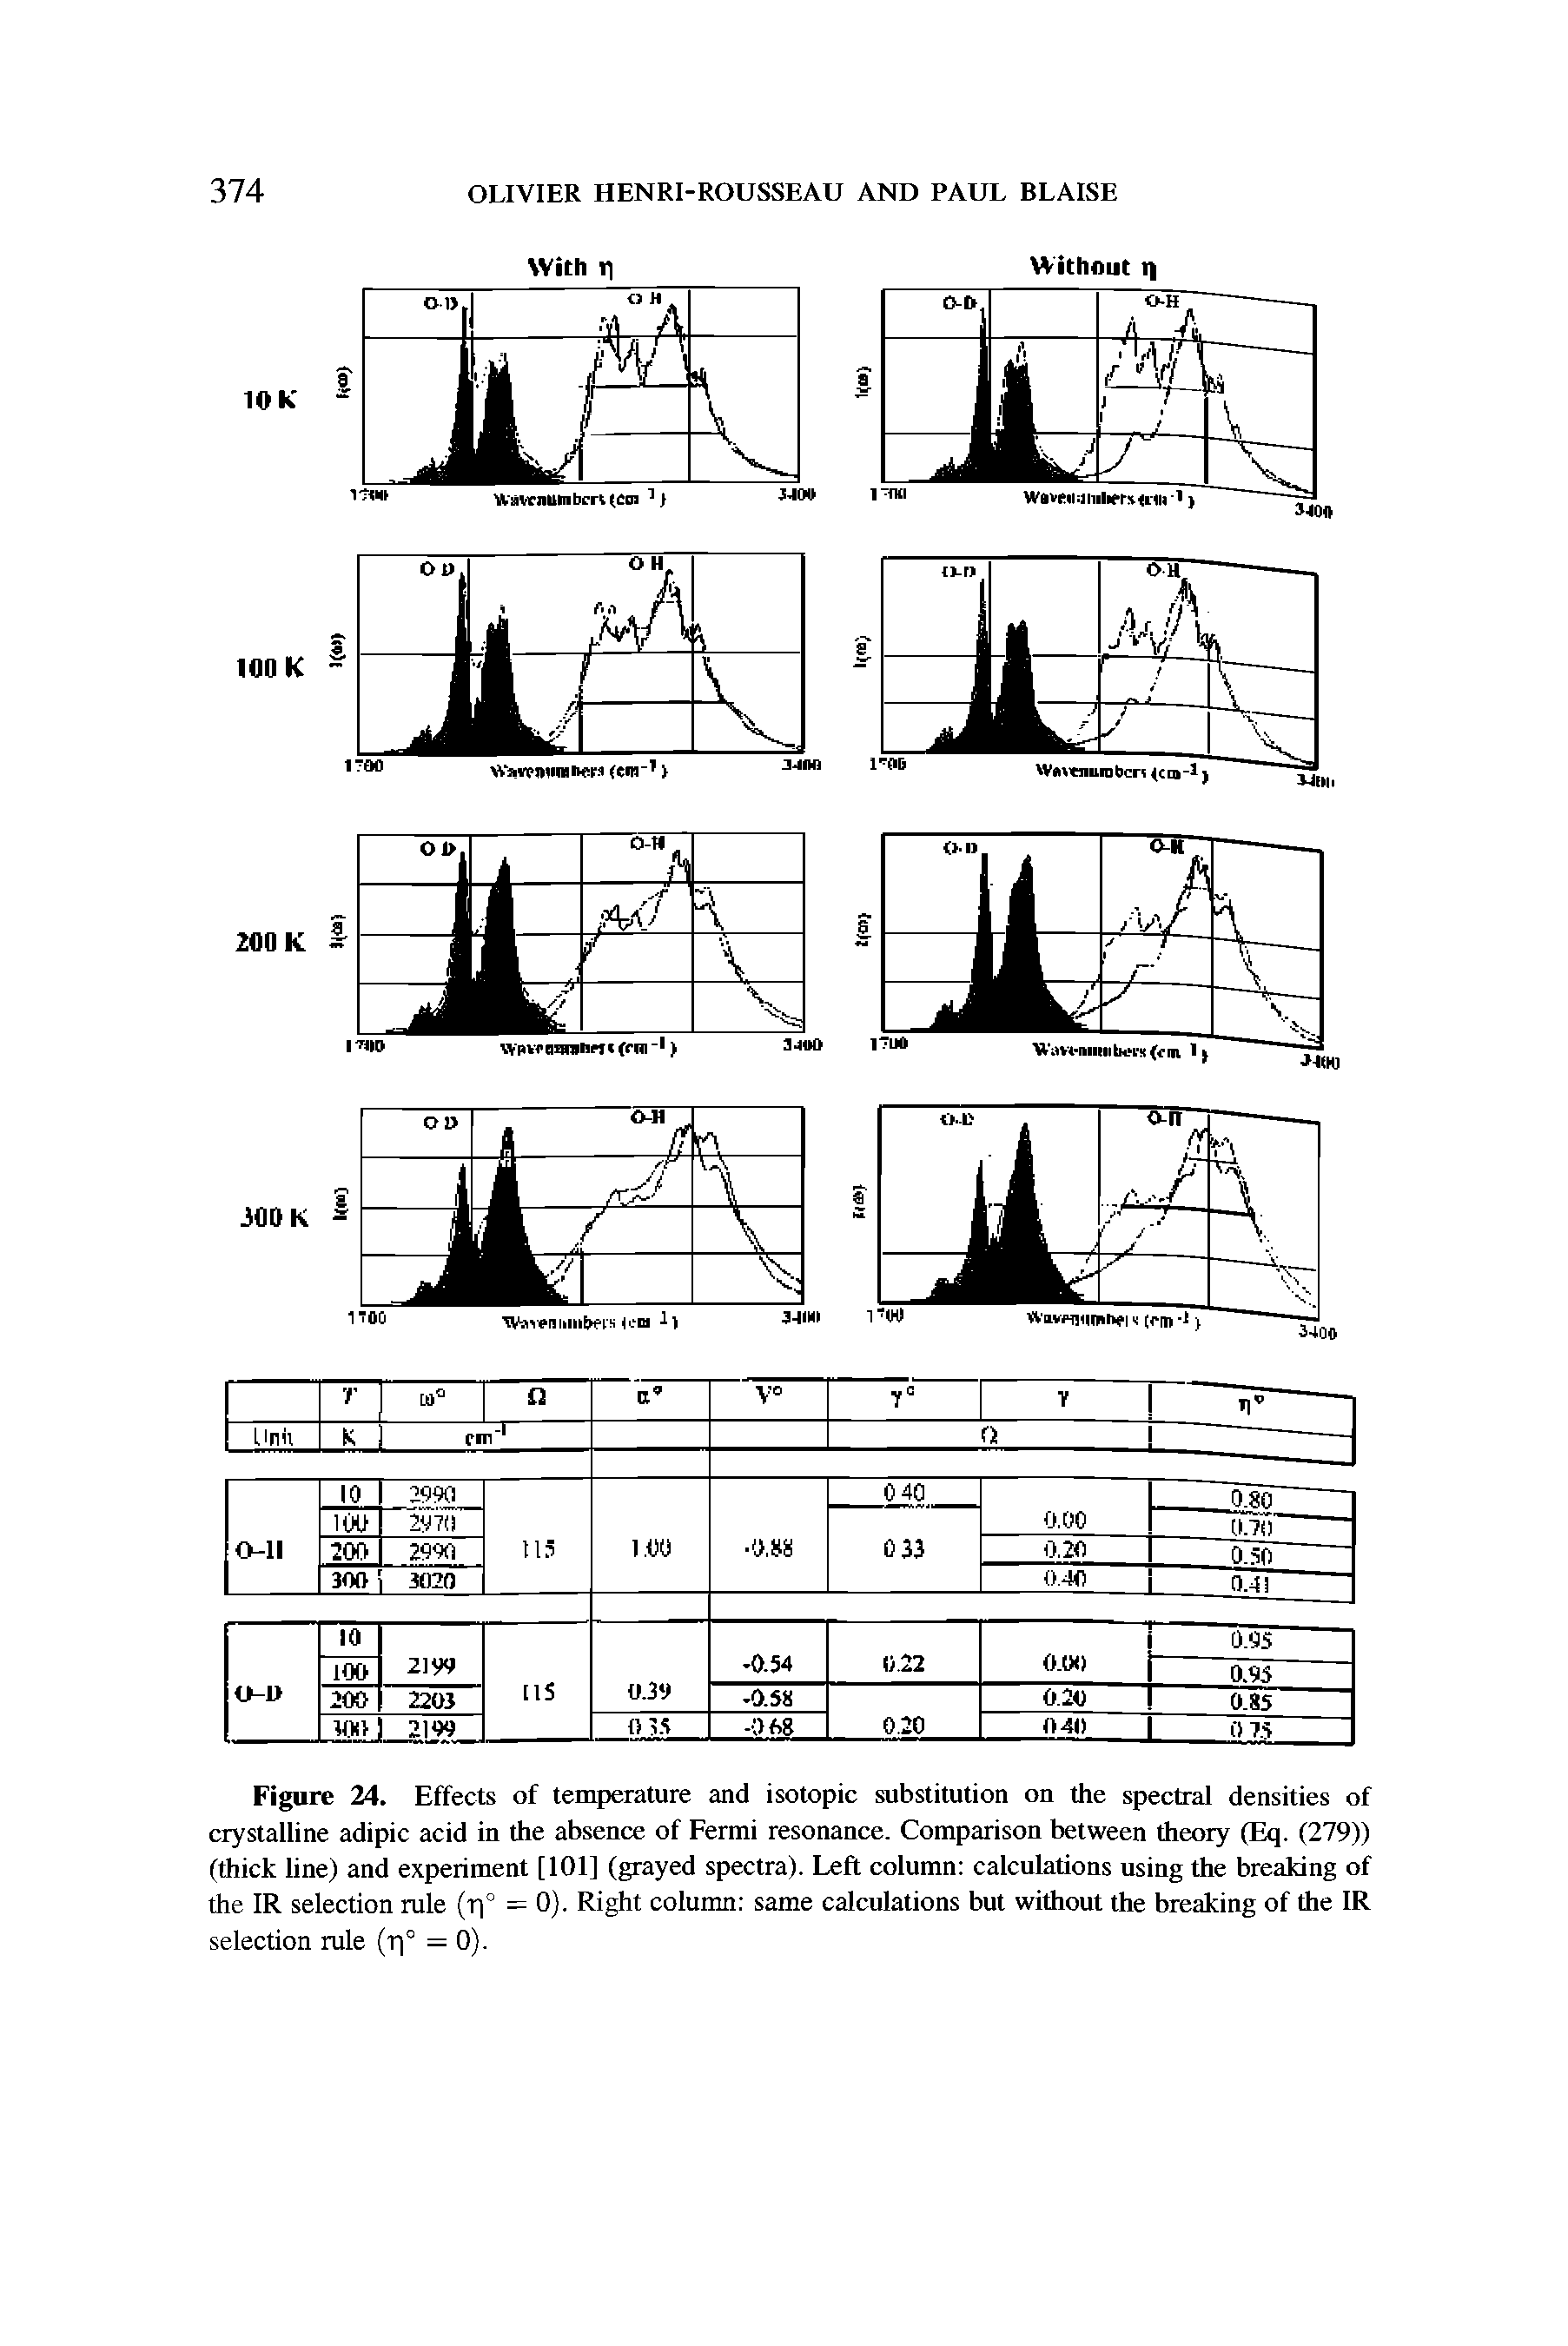 Figure 24. Effects of temperature and isotopic substitution on the spectral densities of crystalline adipic acid in the absence of Fermi resonance. Comparison between theoiy (Eq. (279)) (thick Line) and experiment [101] (grayed spectra). Left column calculations using the breaking of the IR selection rule (r)° = 0). Right column same calculations but without the breaking of the IR selection rule (r 0 = 0).